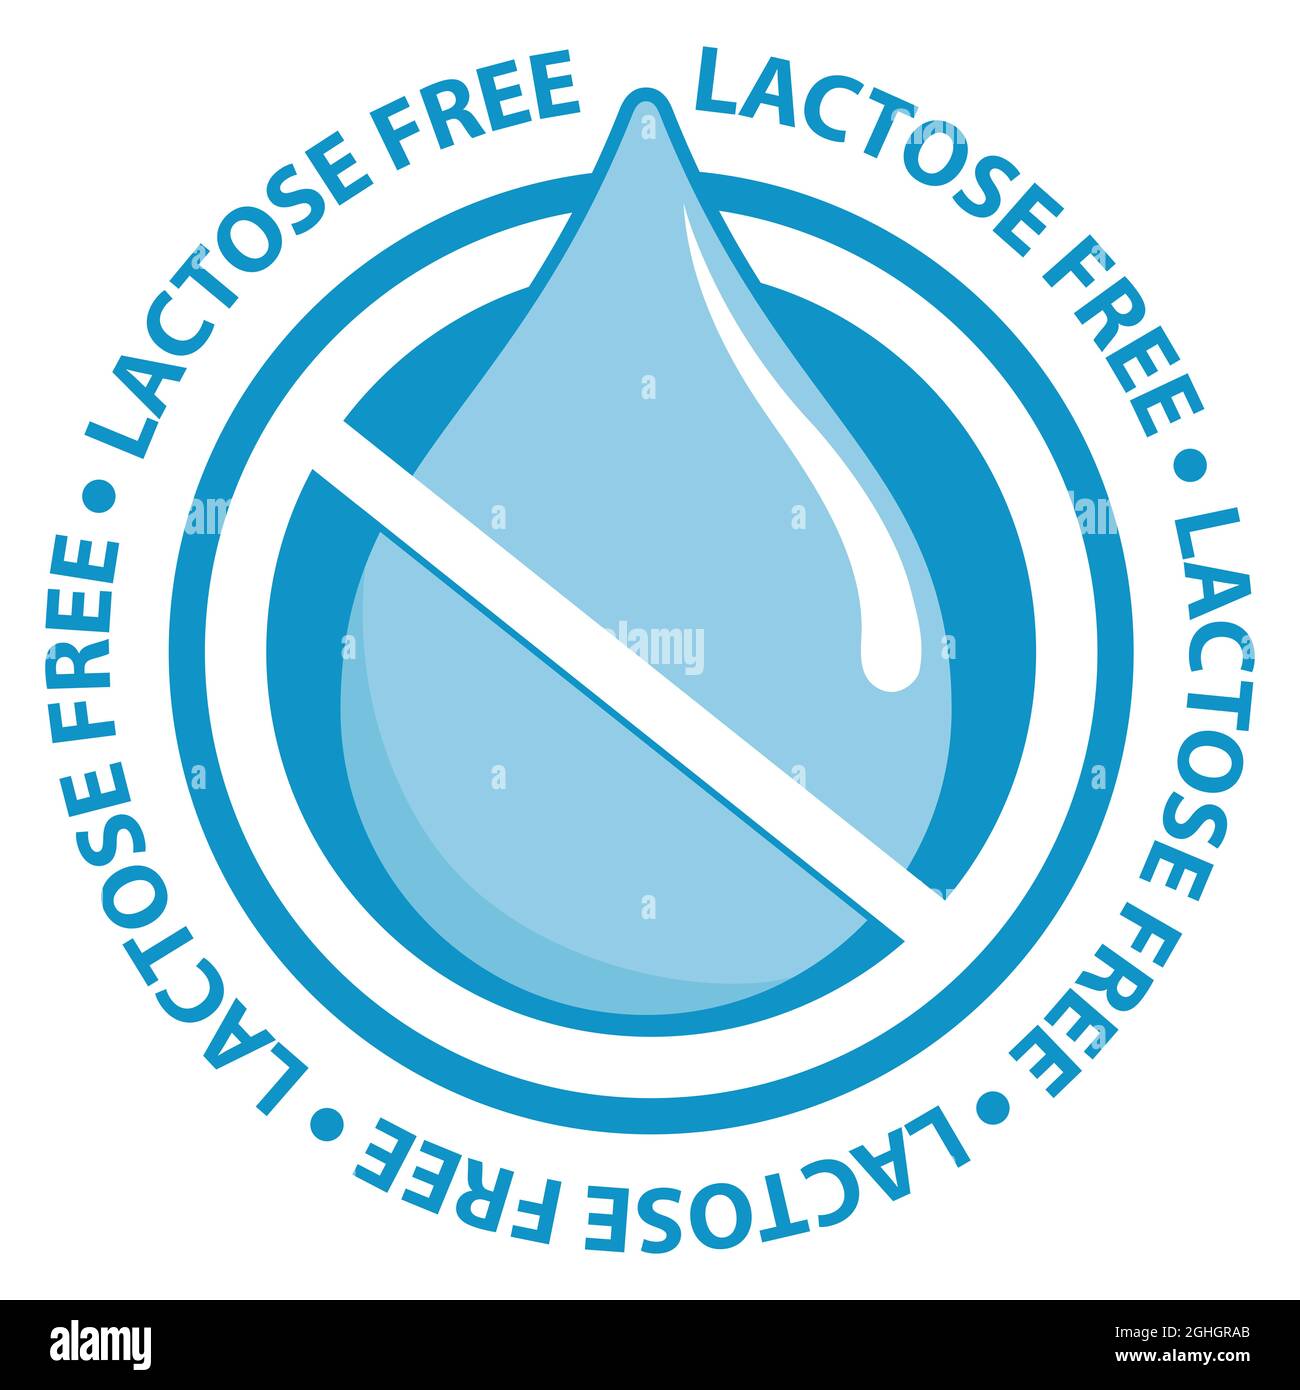 Illustration sign of lactose intolerance label for dairy products. Stock Photo